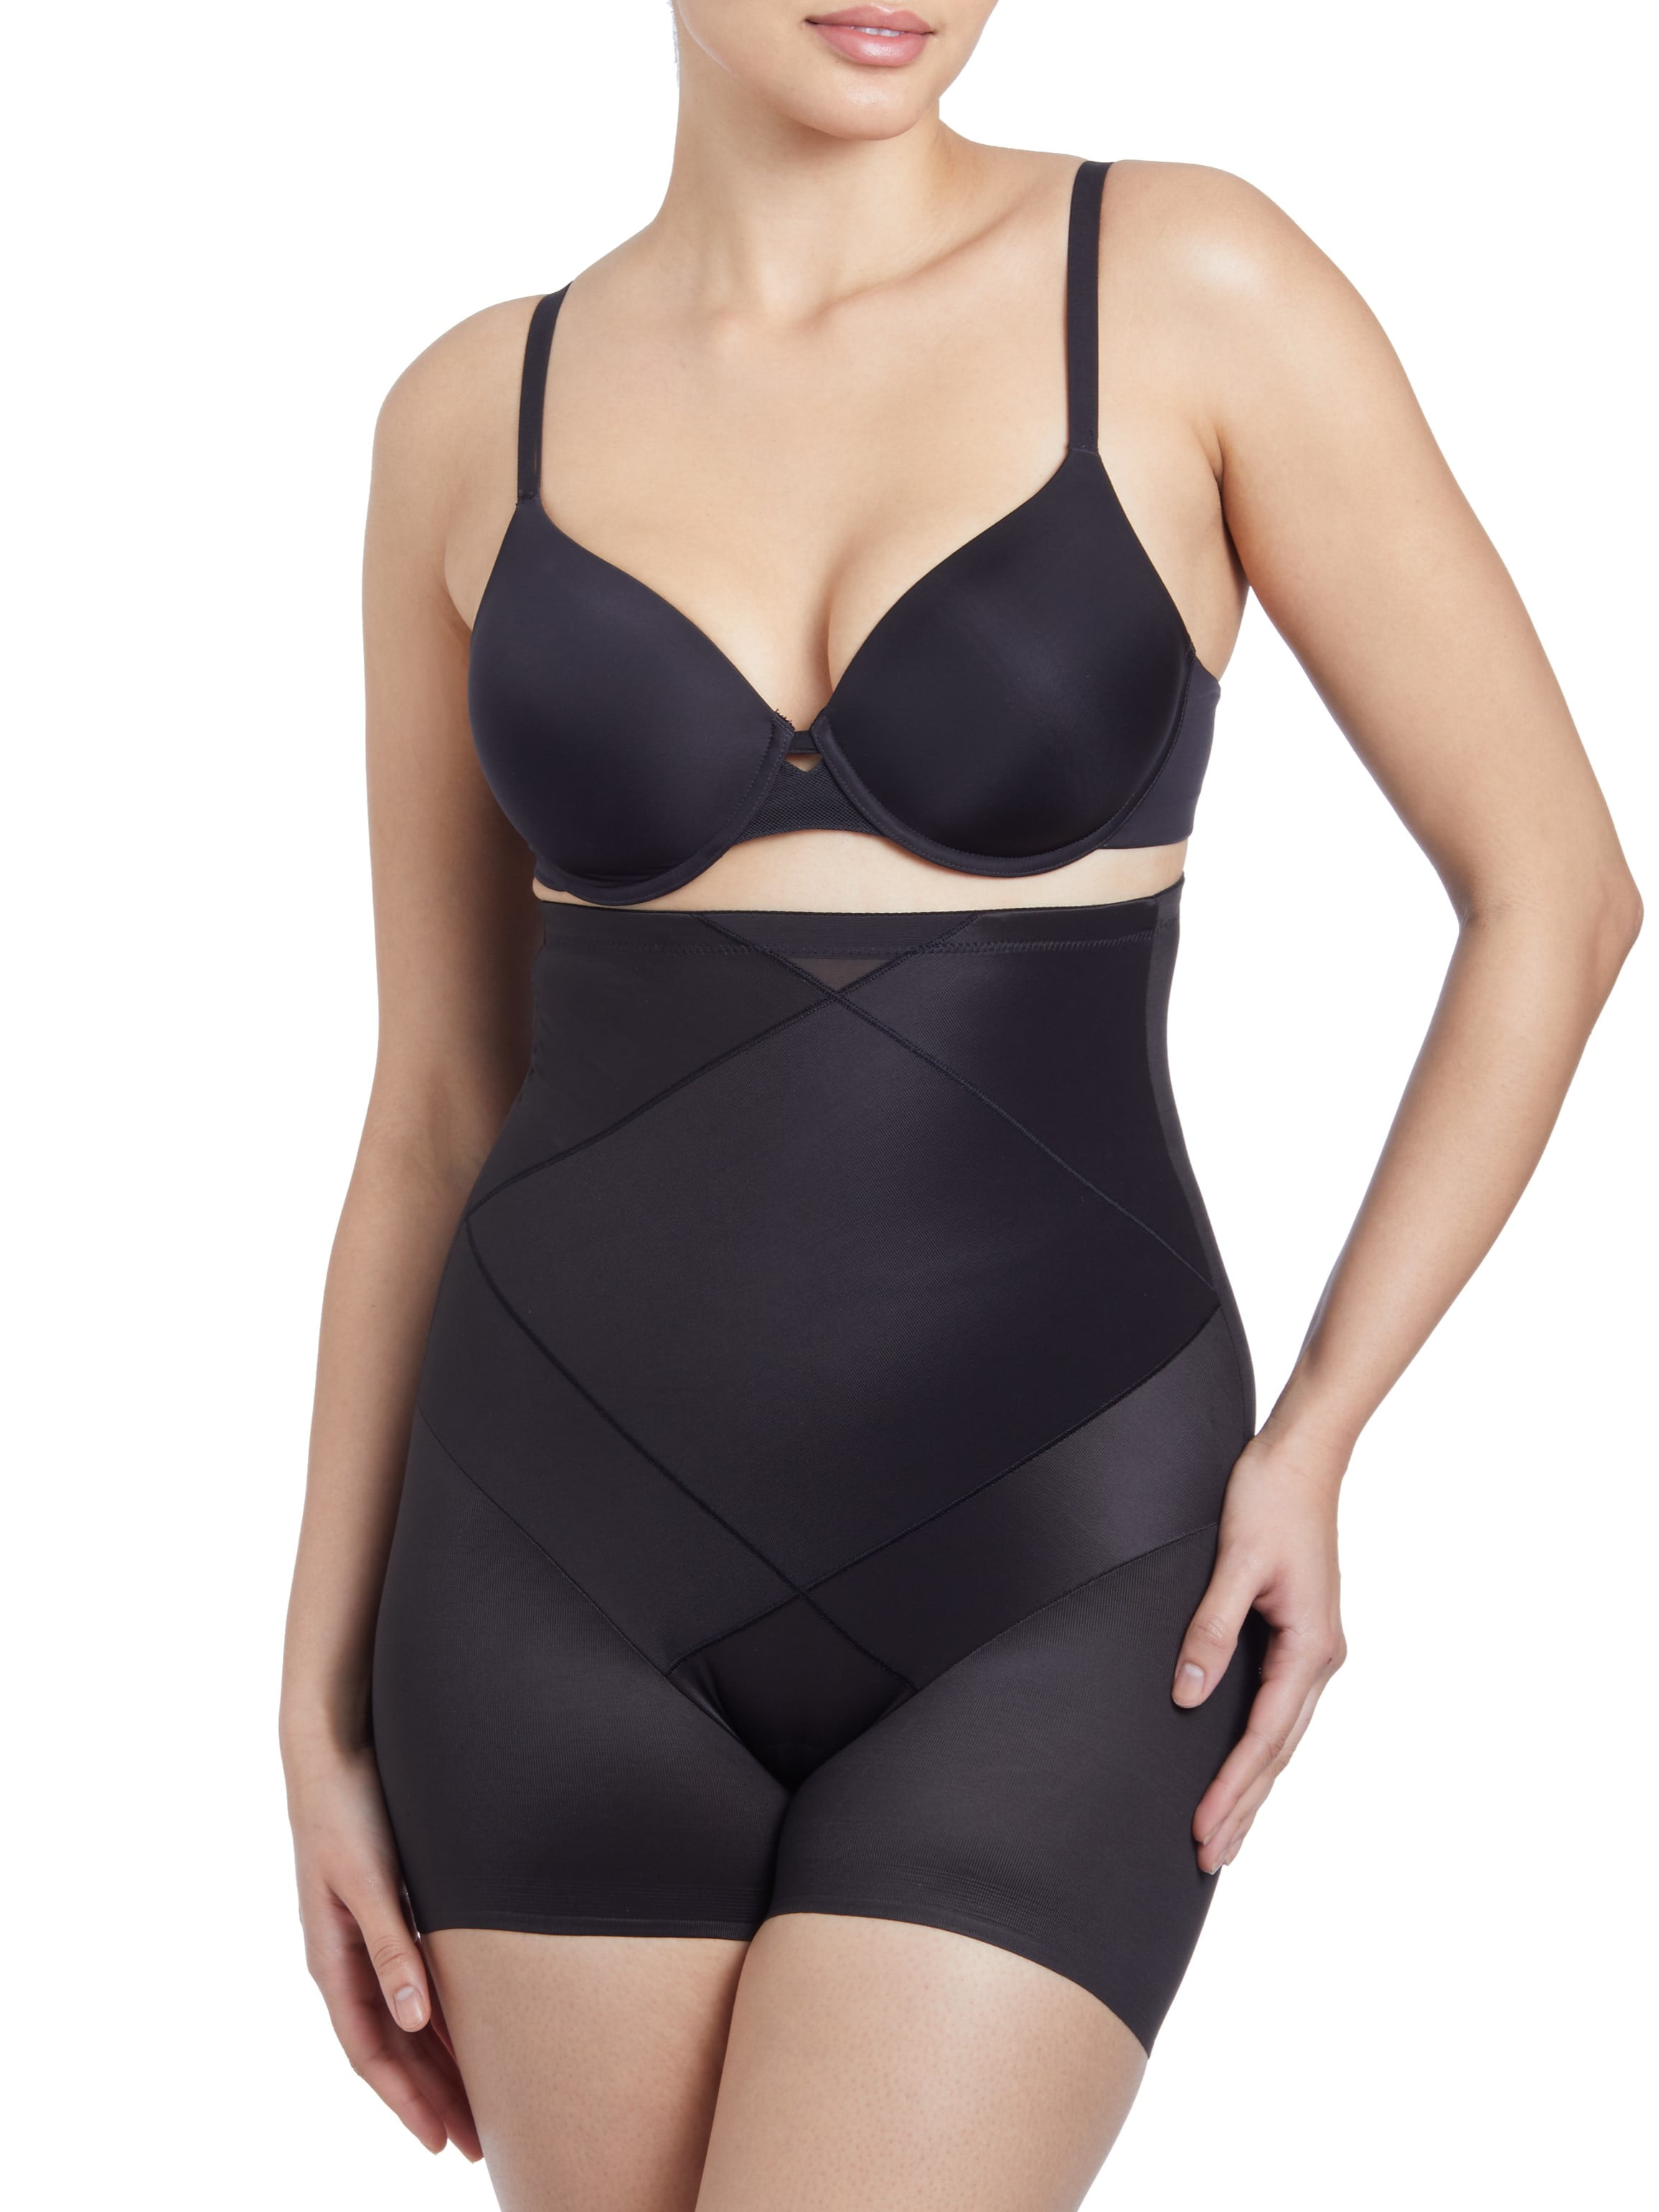 Shapewear, high waist mini Style # 6672  Clothing offers, Clothing  coupons, Clothes for women